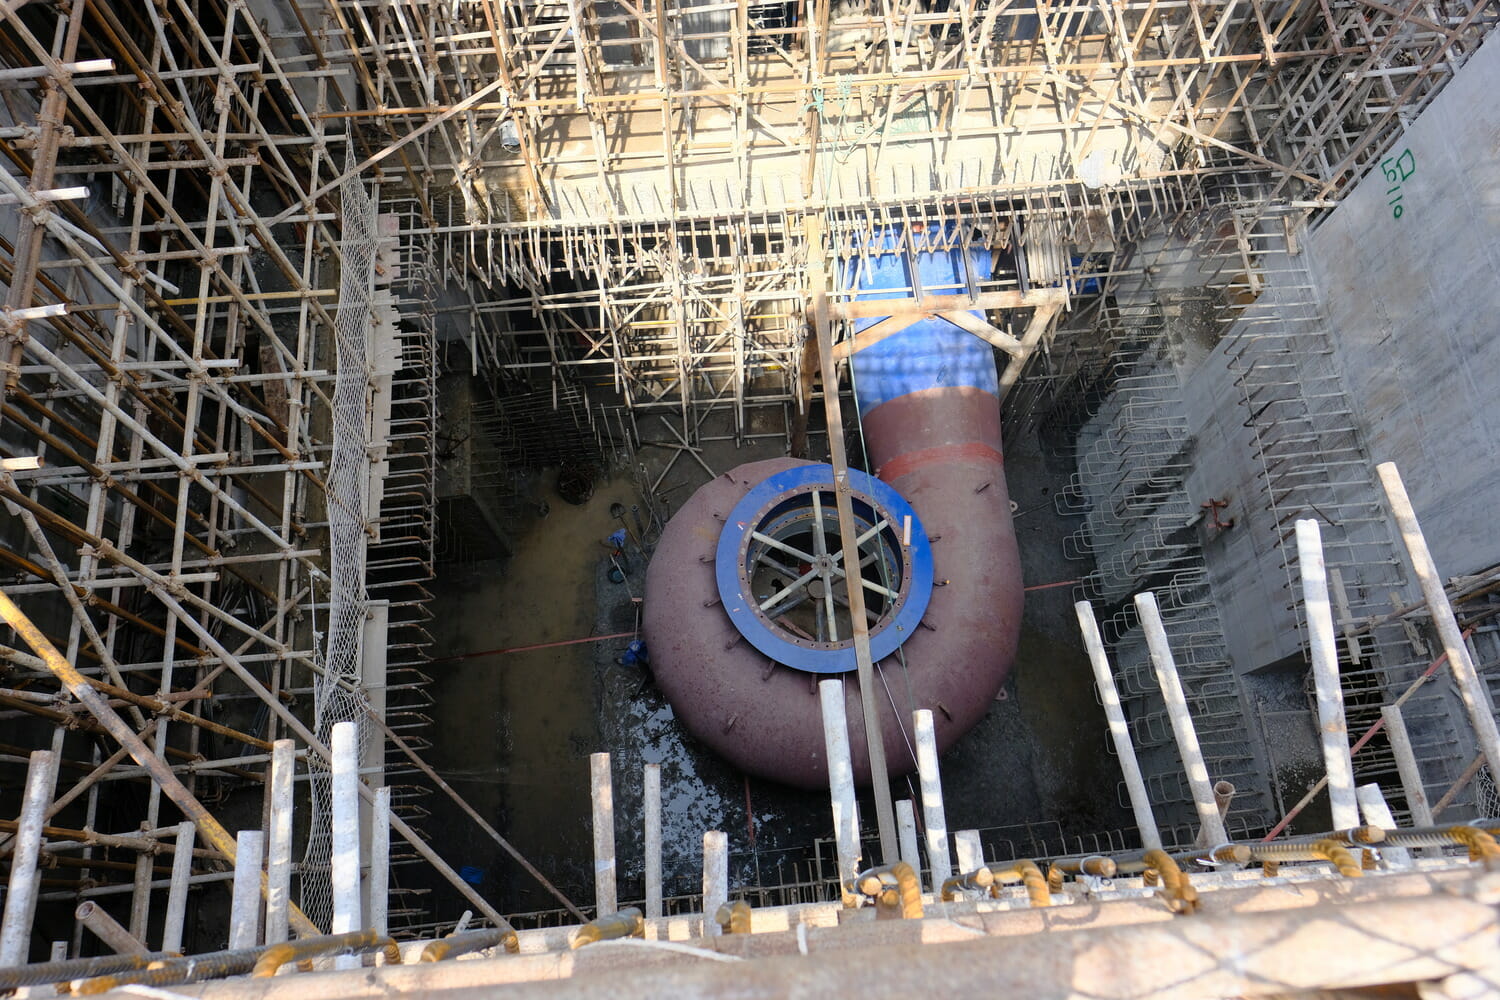 A large pipe is under construction in a building.